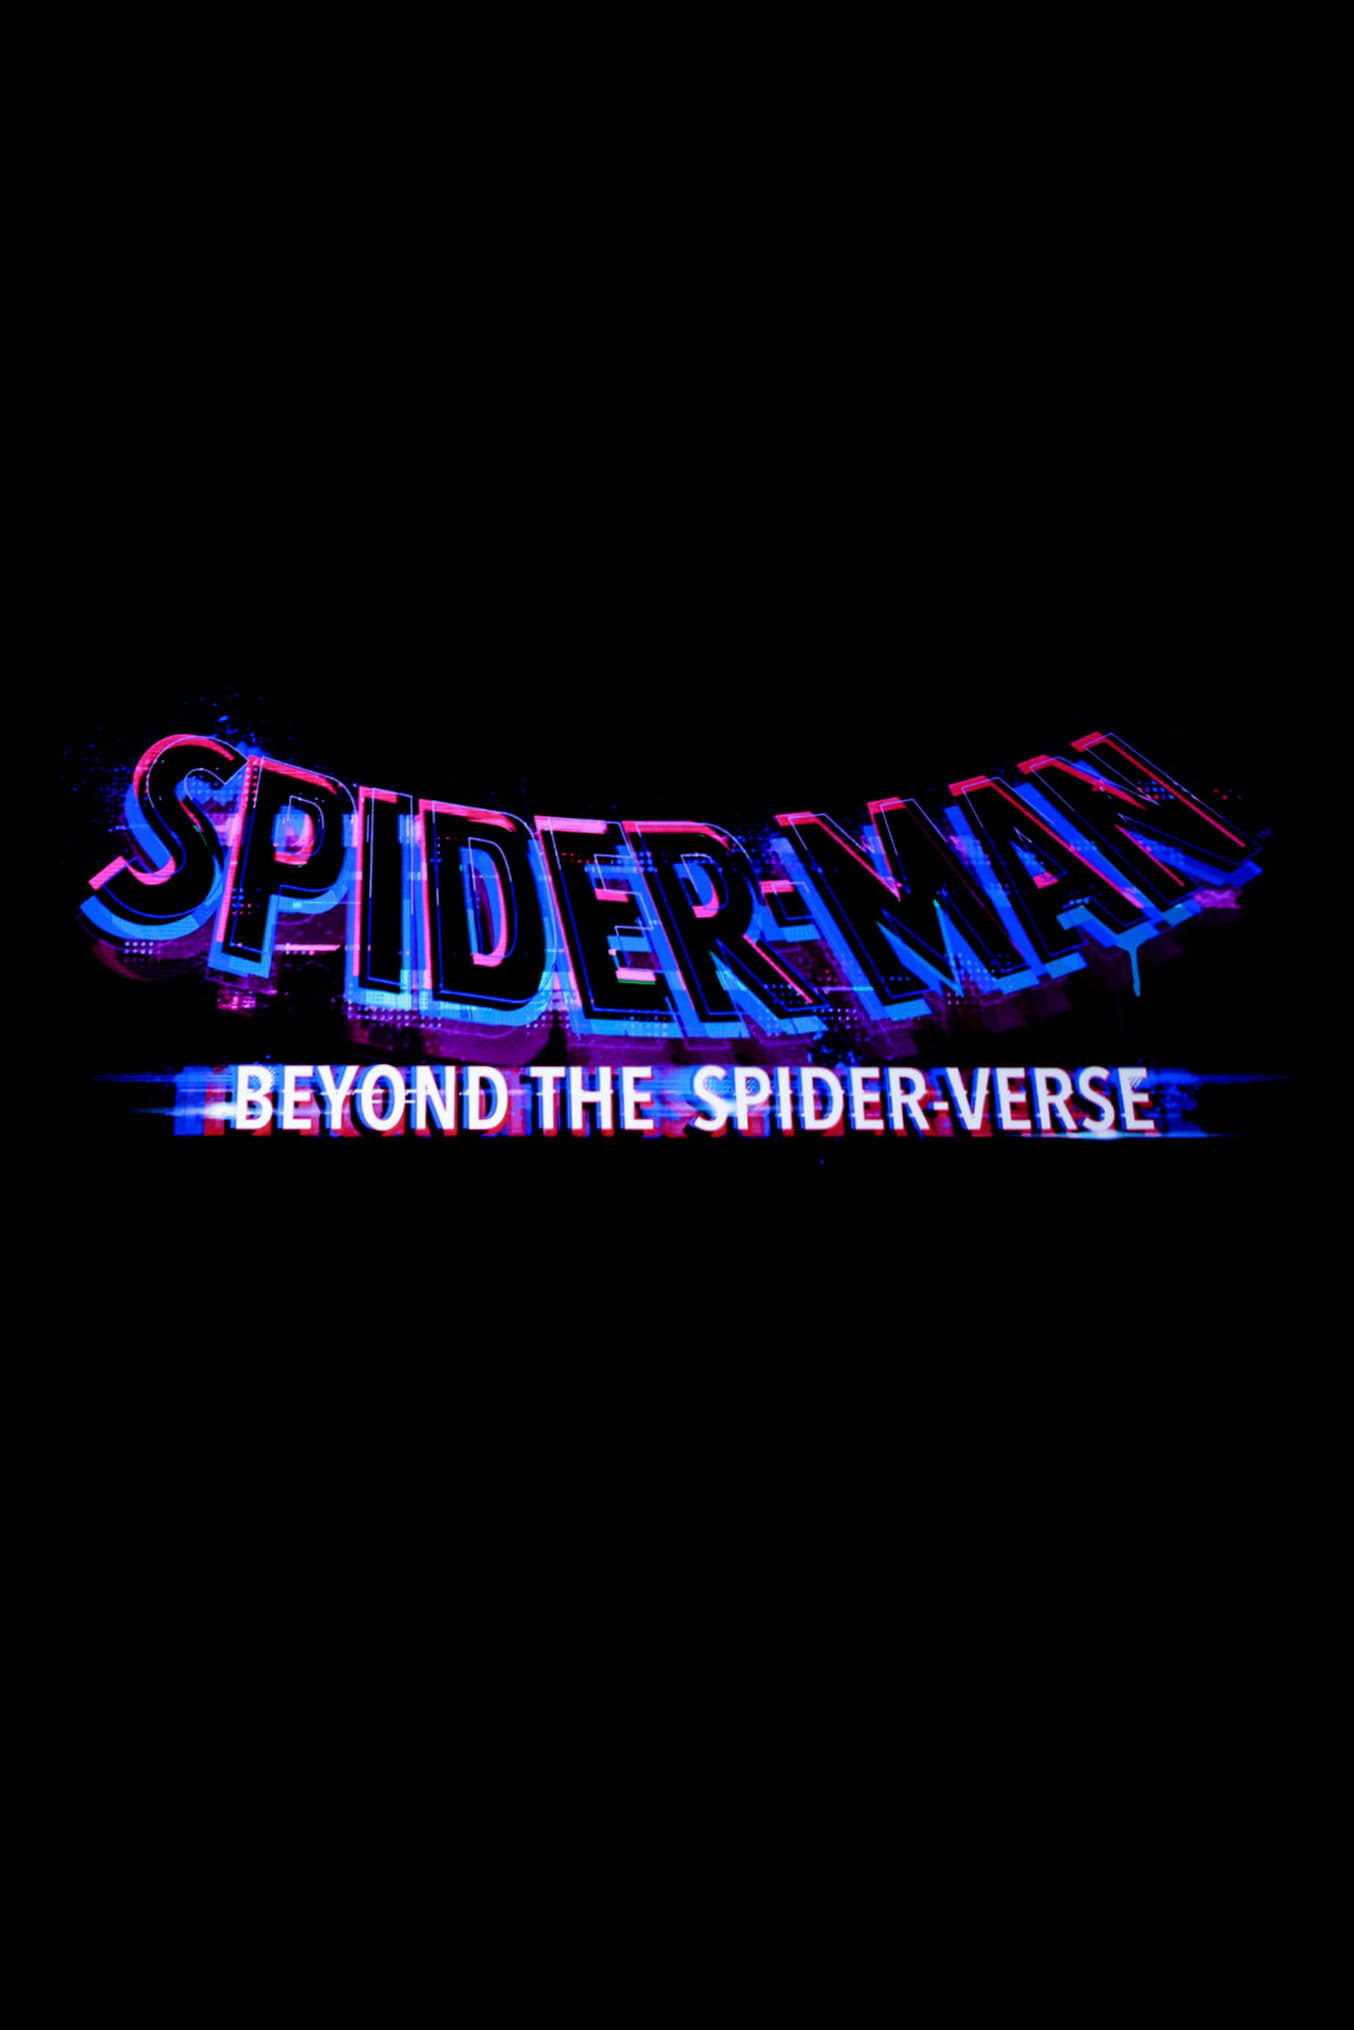 Poster for the movie "Spider-Man: Beyond the Spider-Verse"